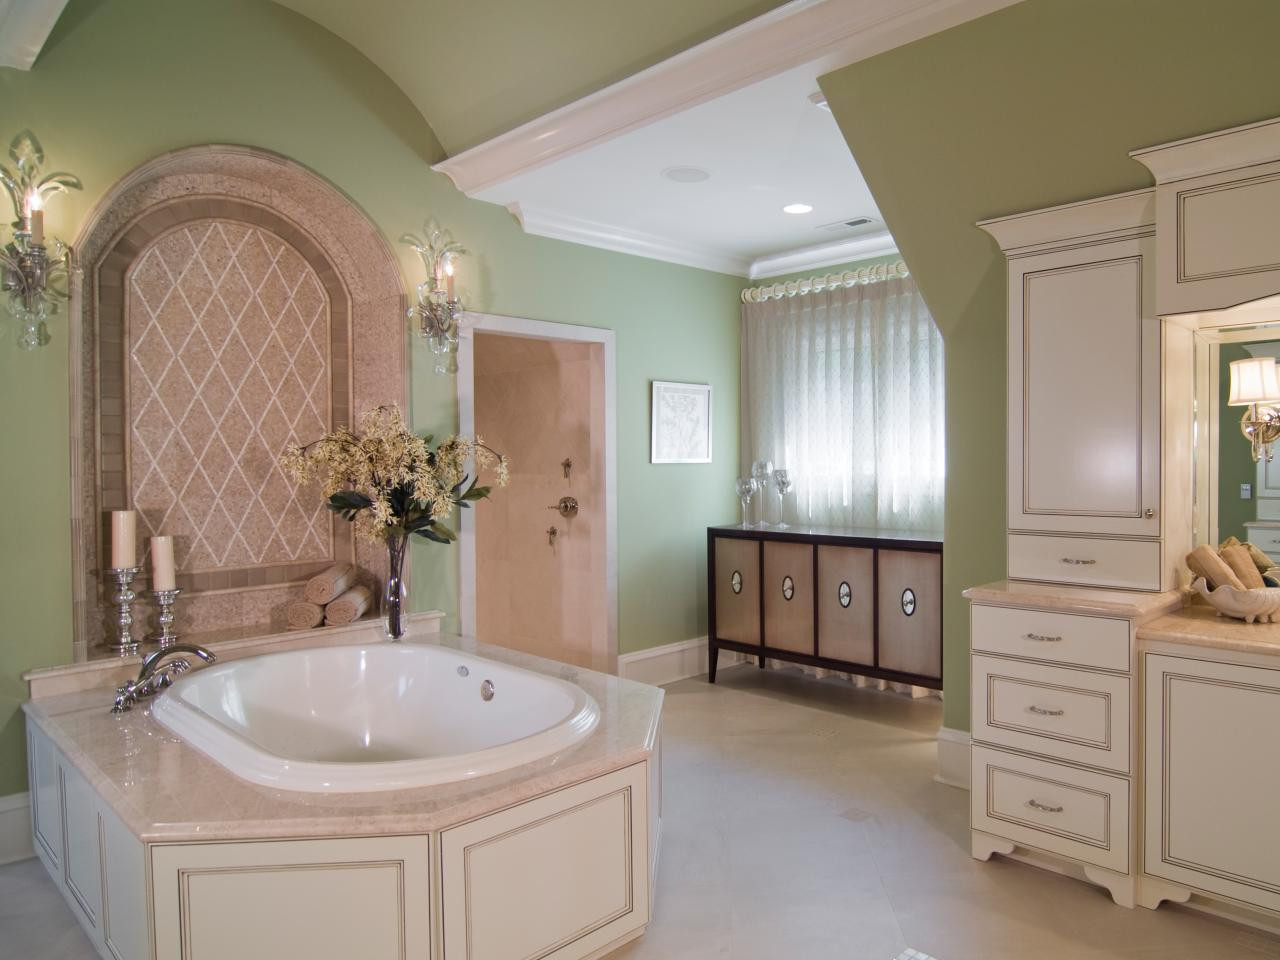 Master Bathroom Decorating Ideas
 How to Improve Master Bathroom Designs in Better Way